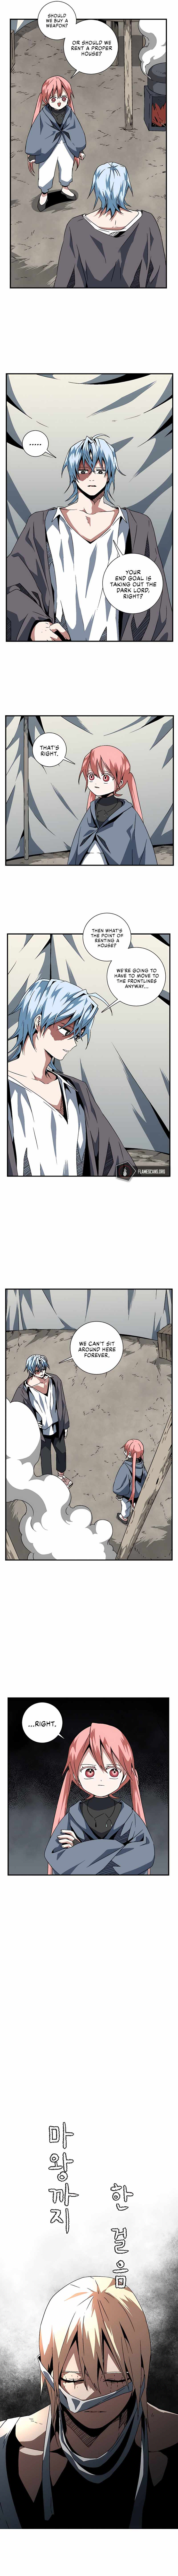 One Step to Being Dark Lord Chapter 23-eng-li - Page 3